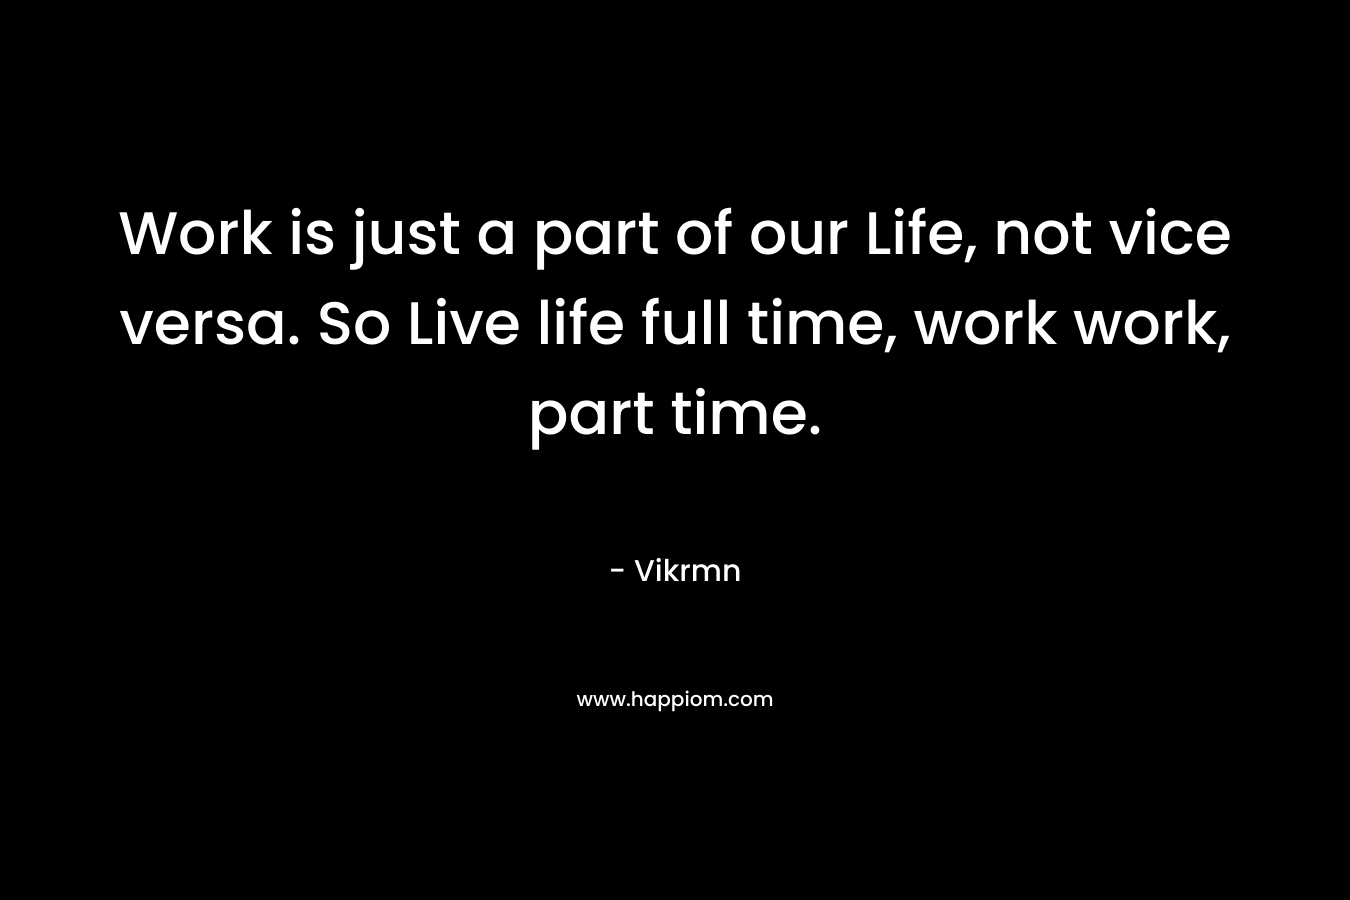 Work is just a part of our Life, not vice versa. So Live life full time, work work, part time.